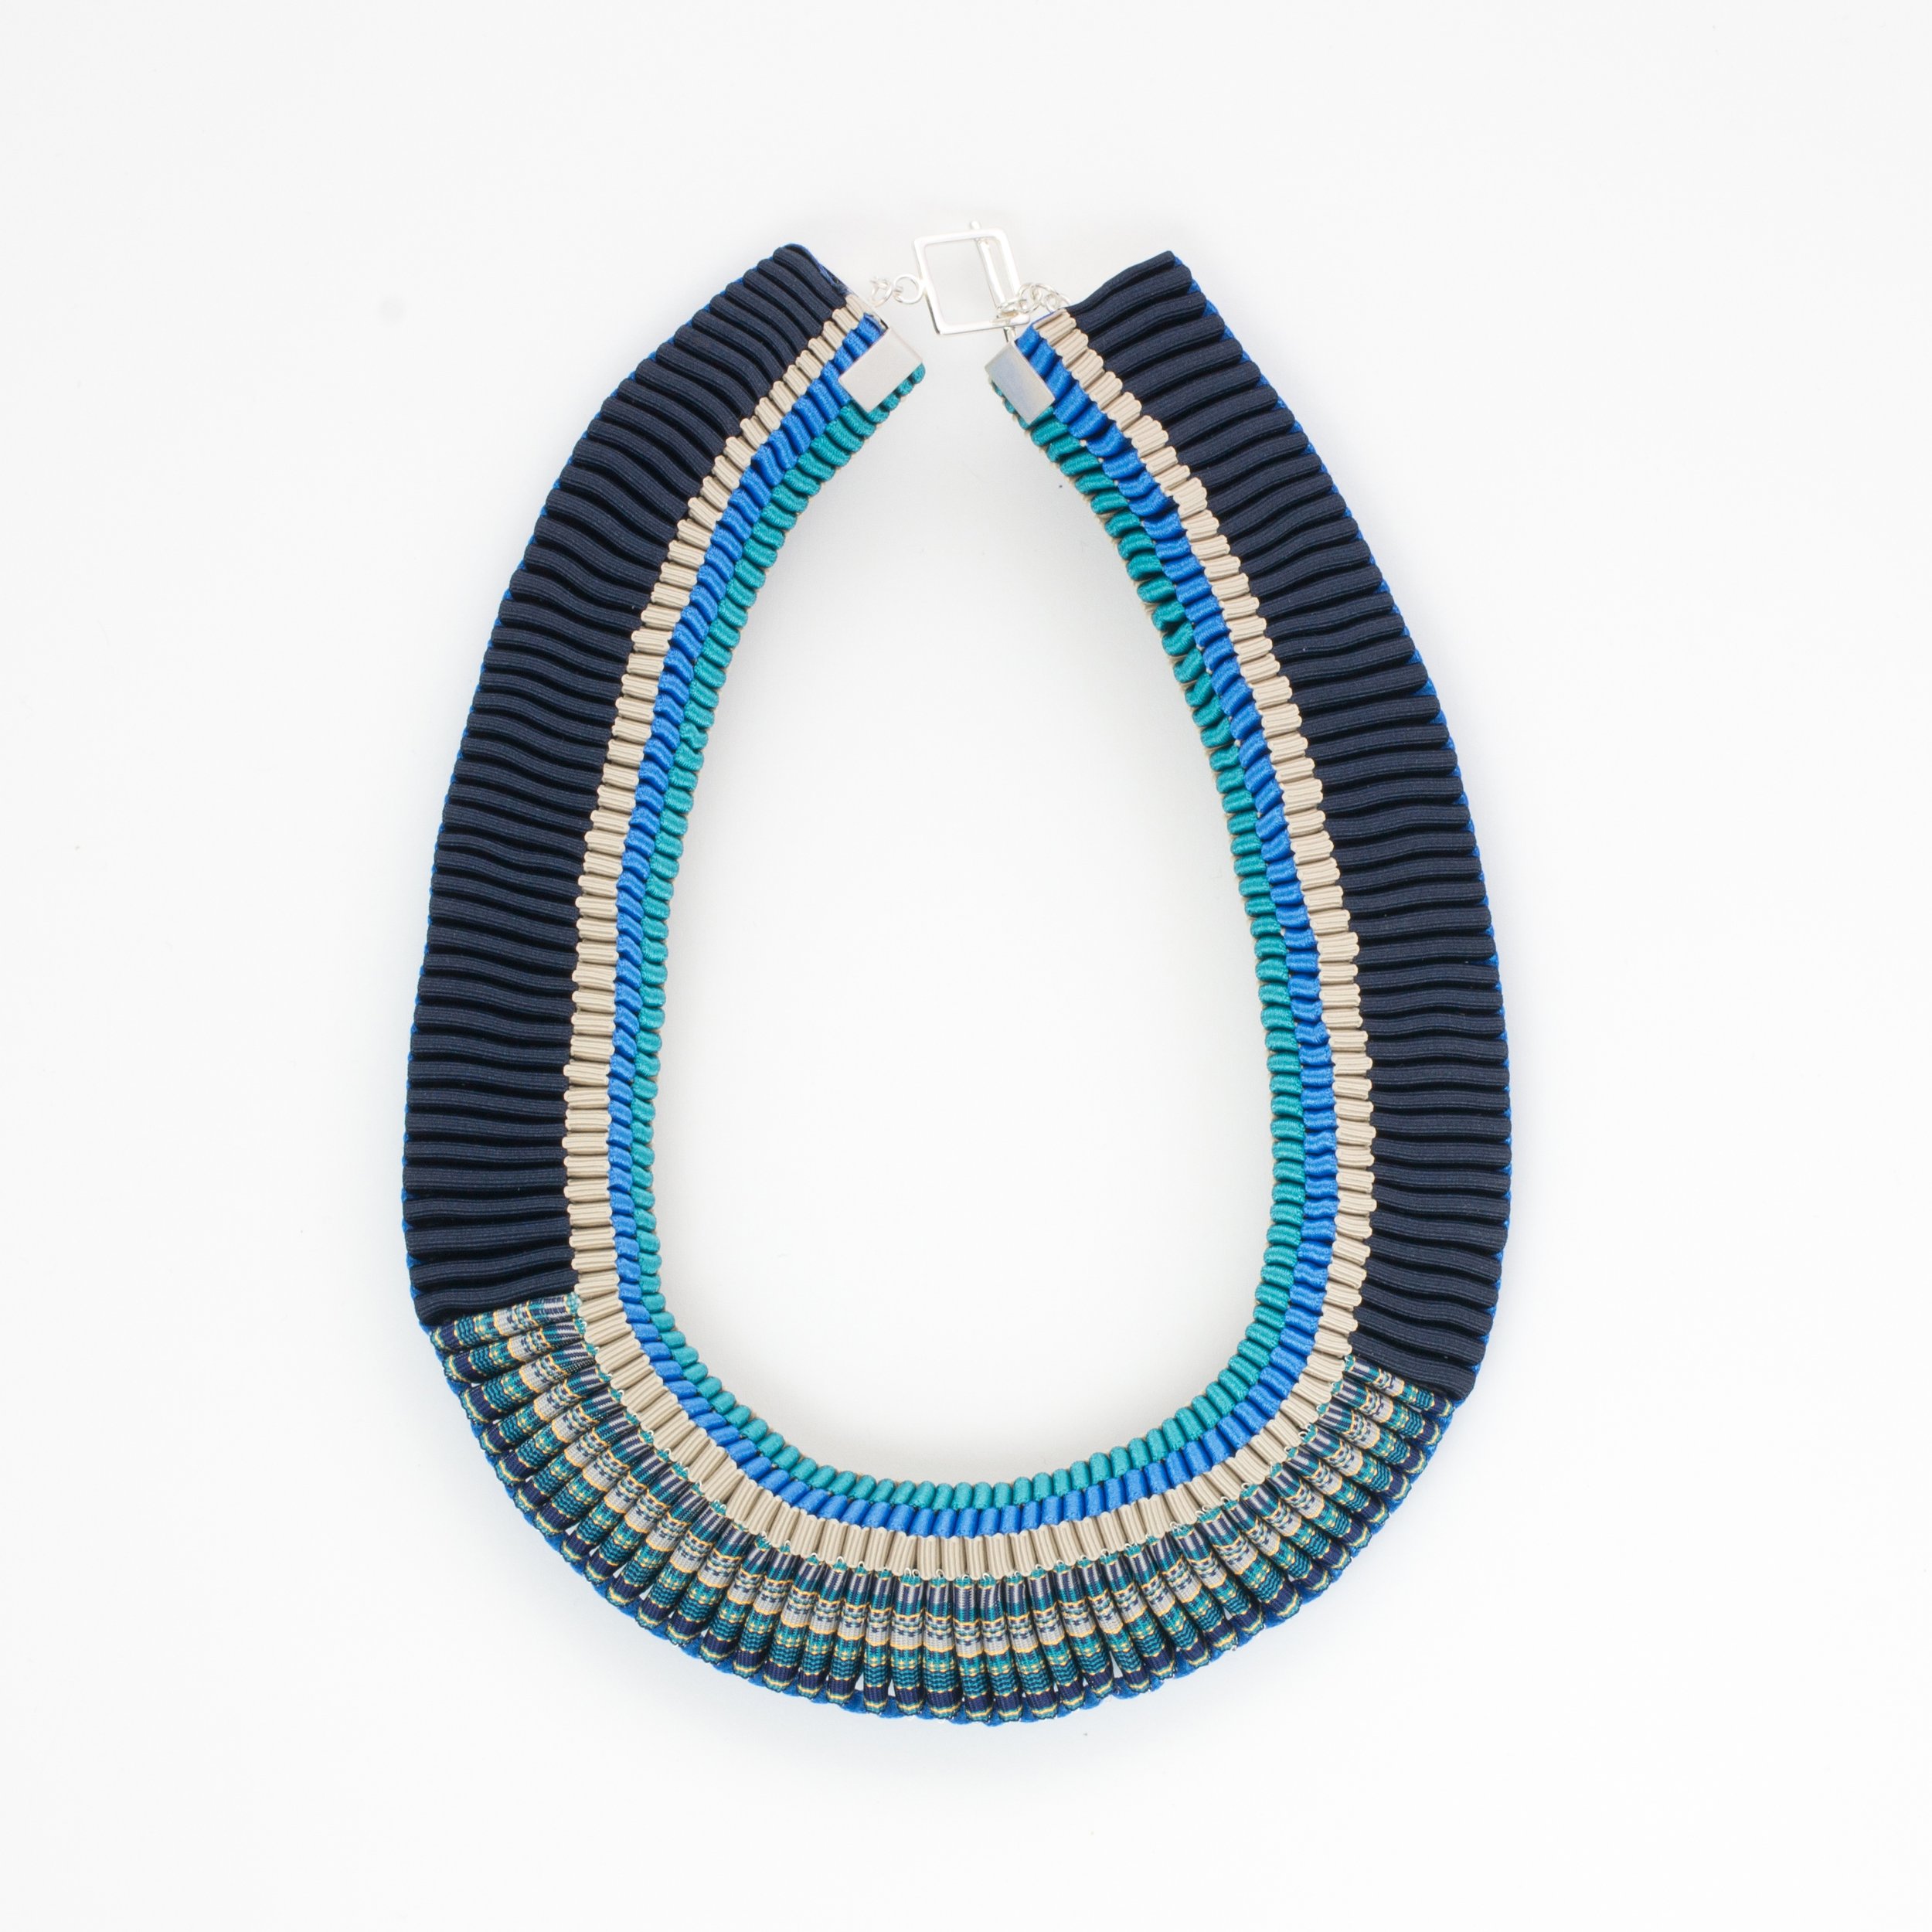 Seagreen & Navy Statement Collar with Handwoven Ribbon.jpg